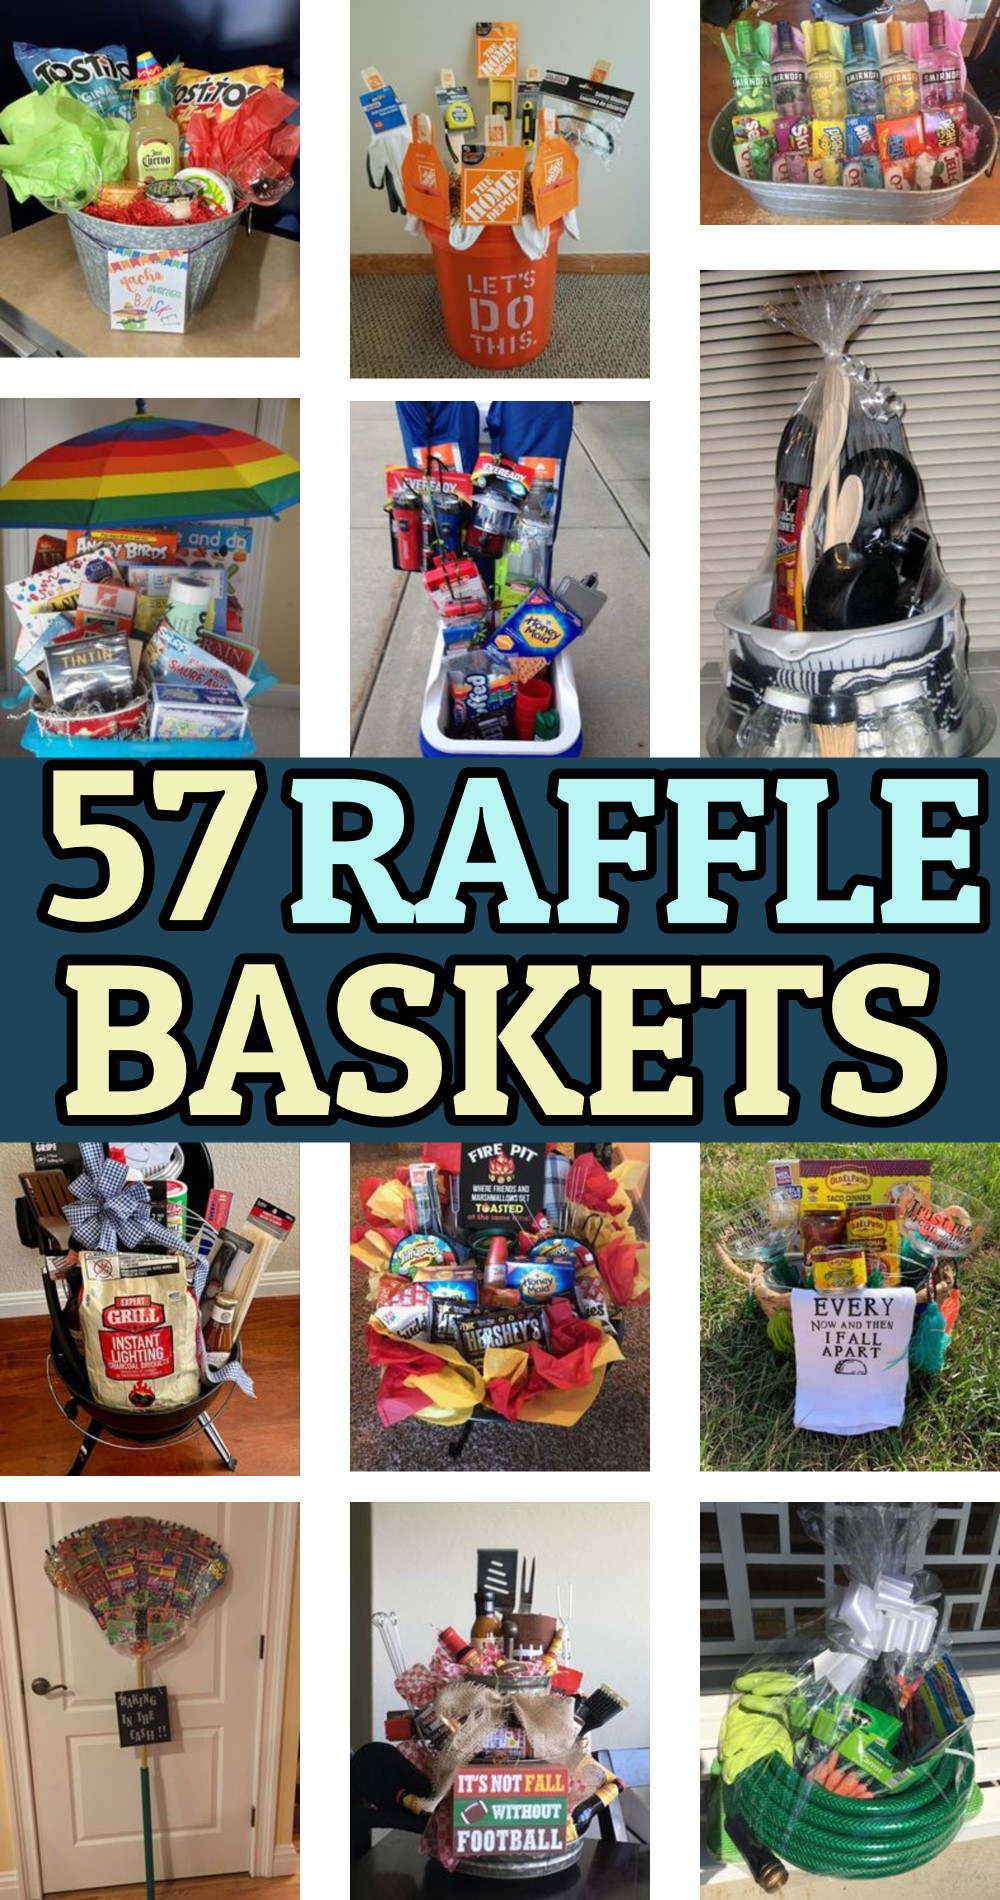 Raffle Basket Ideas and Auction Gift Baskets For Fundraisers and Charity Events